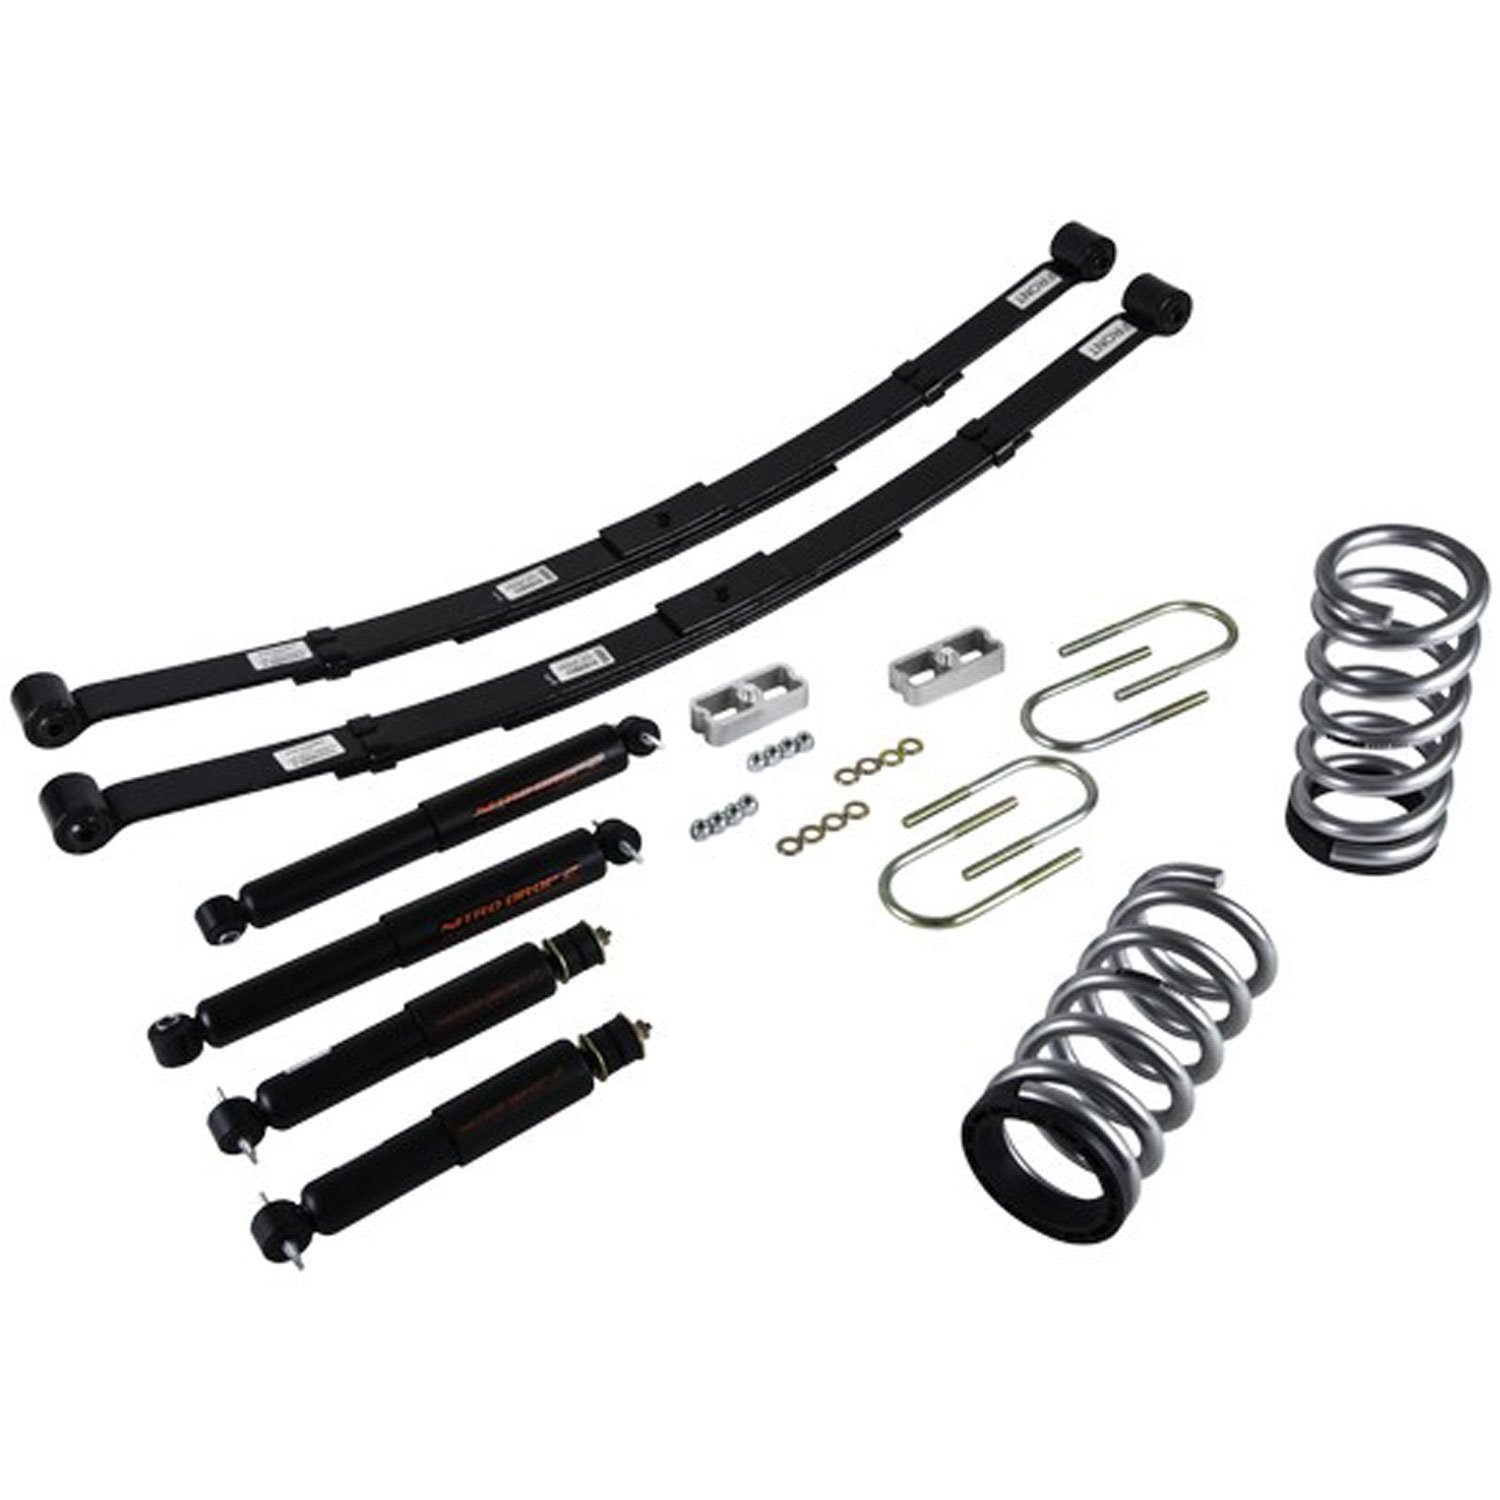 Complete Lowering Kit for 1995-1997 Chevy Blazer/GMC Jimmy